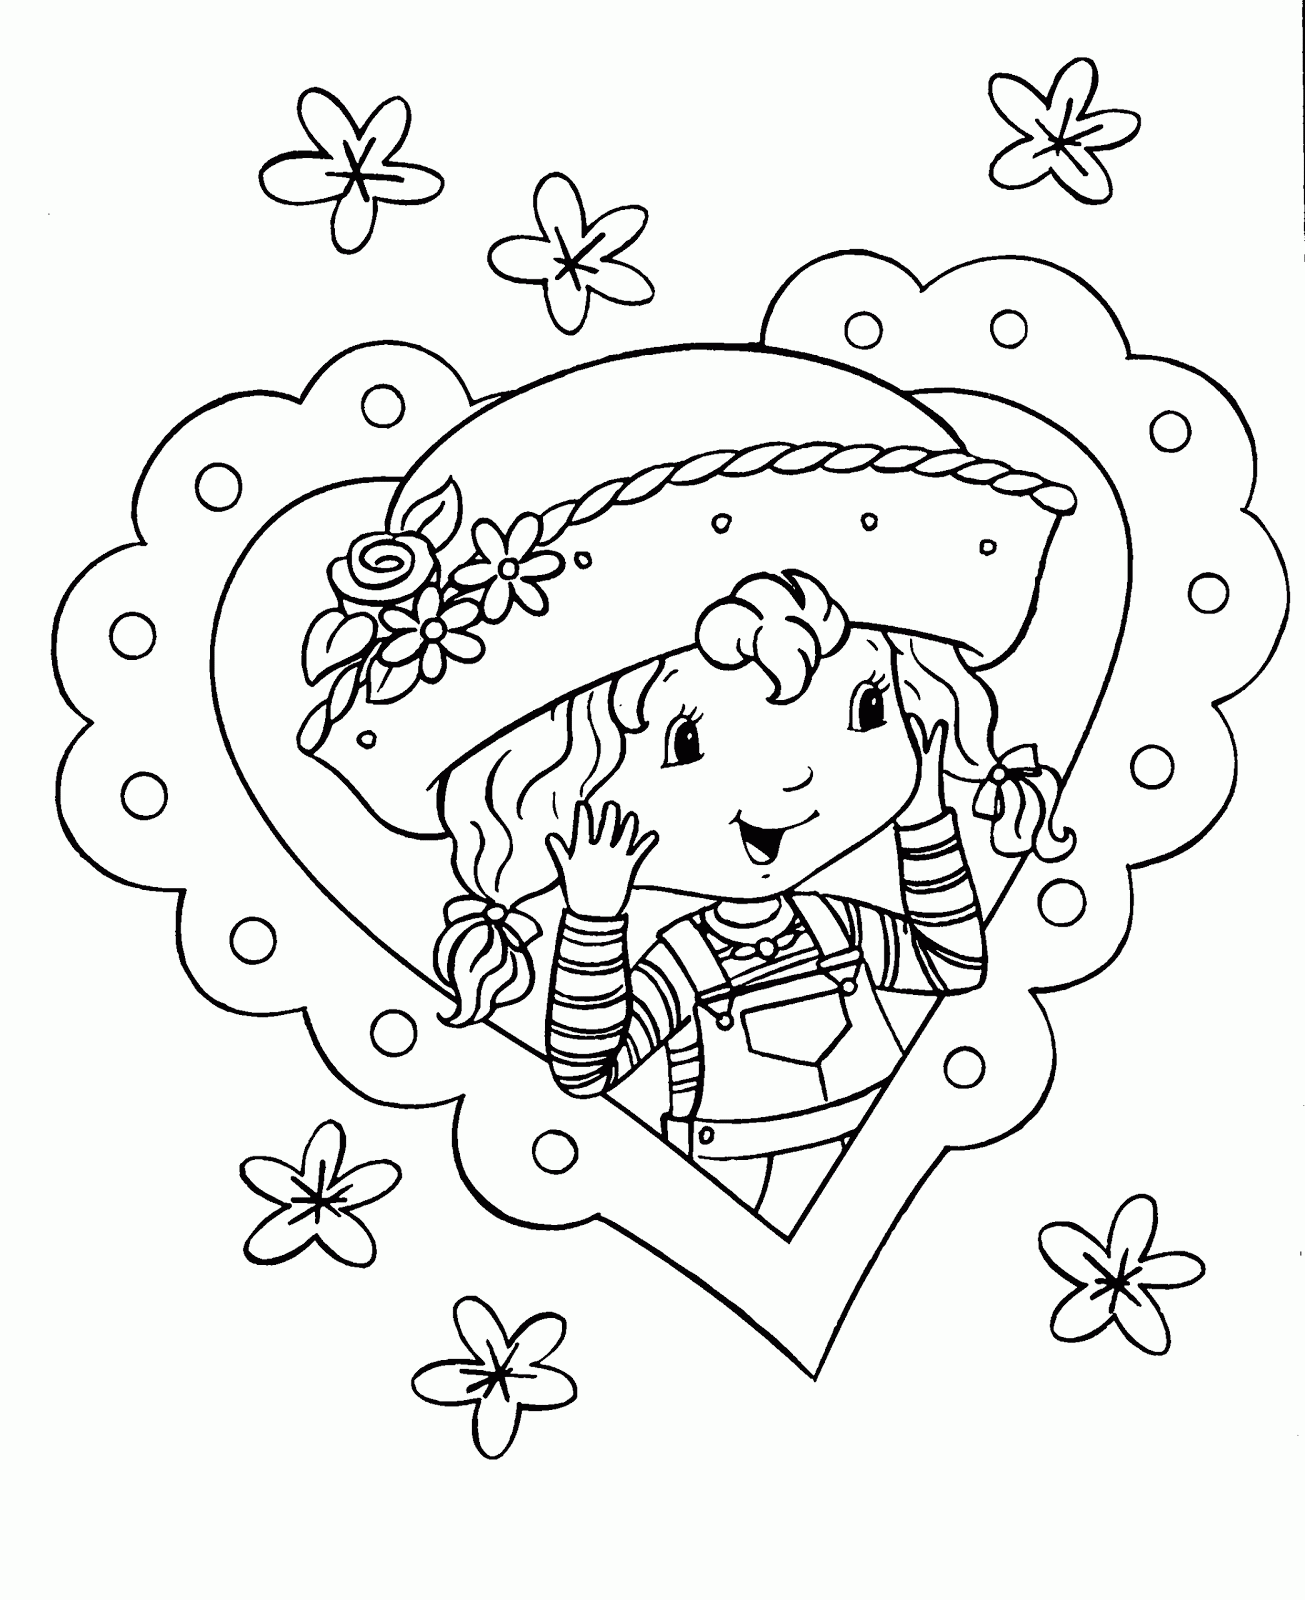 pictures of strawberry shortcake strawberry shortcake coloring pages coloring pages shortcake pictures of strawberry 